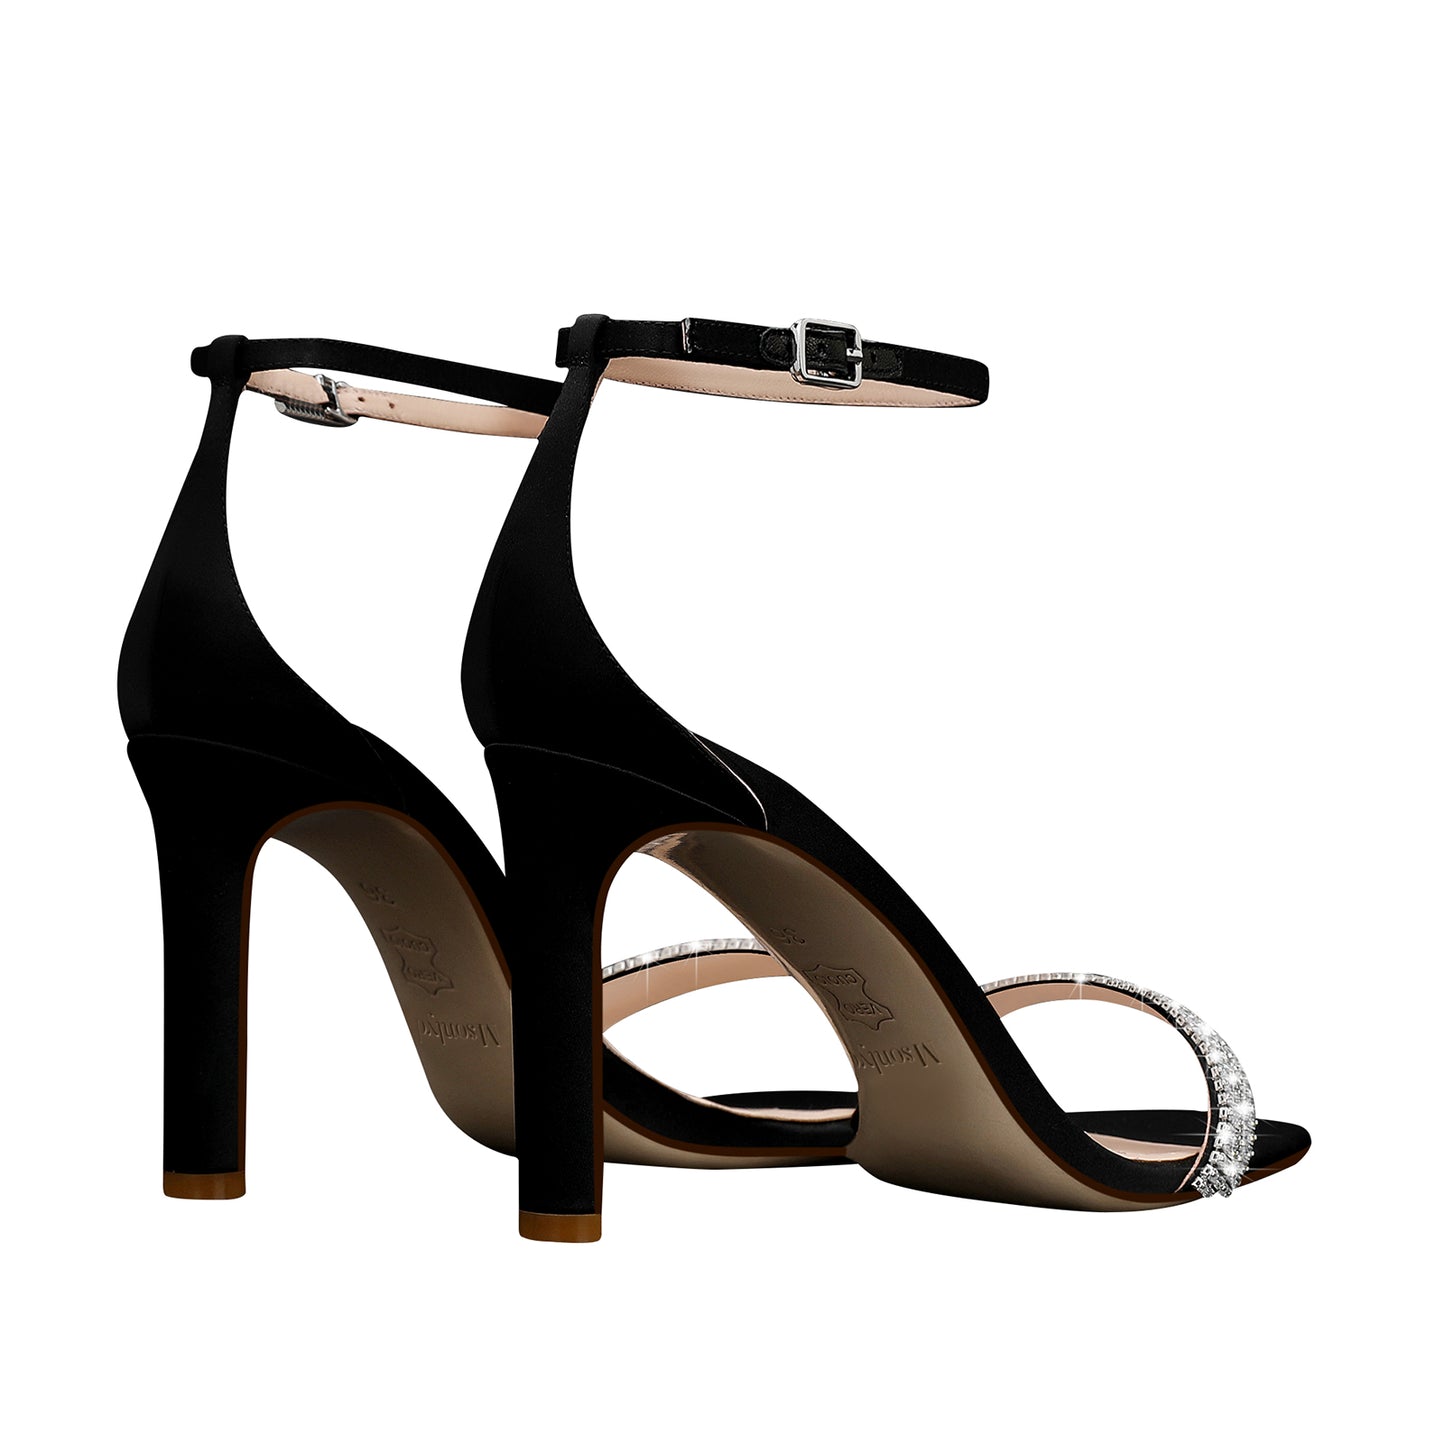 Women's Dressy Casual Diamond Square Toe Sandals with Thick Block Heel and Leather Strap